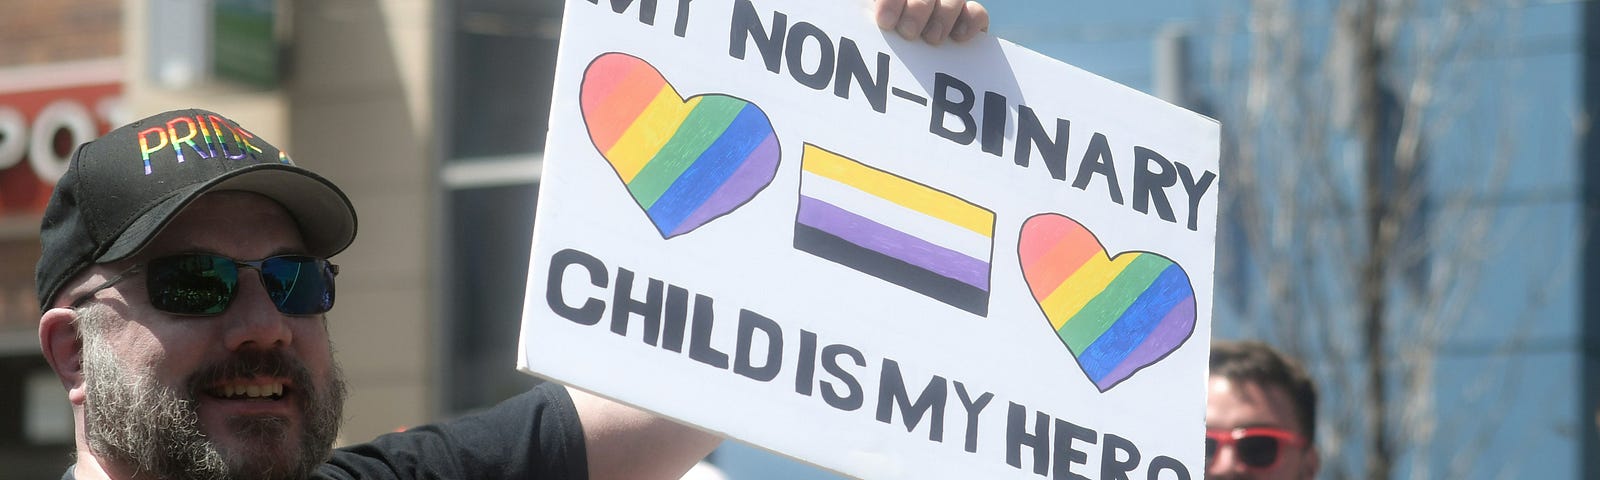 A man at a pride parade wears pride hat and t-shirt. He’s holding up a sign that says, “My non-binary child is my hero” and it has the pride and trans flag on it.